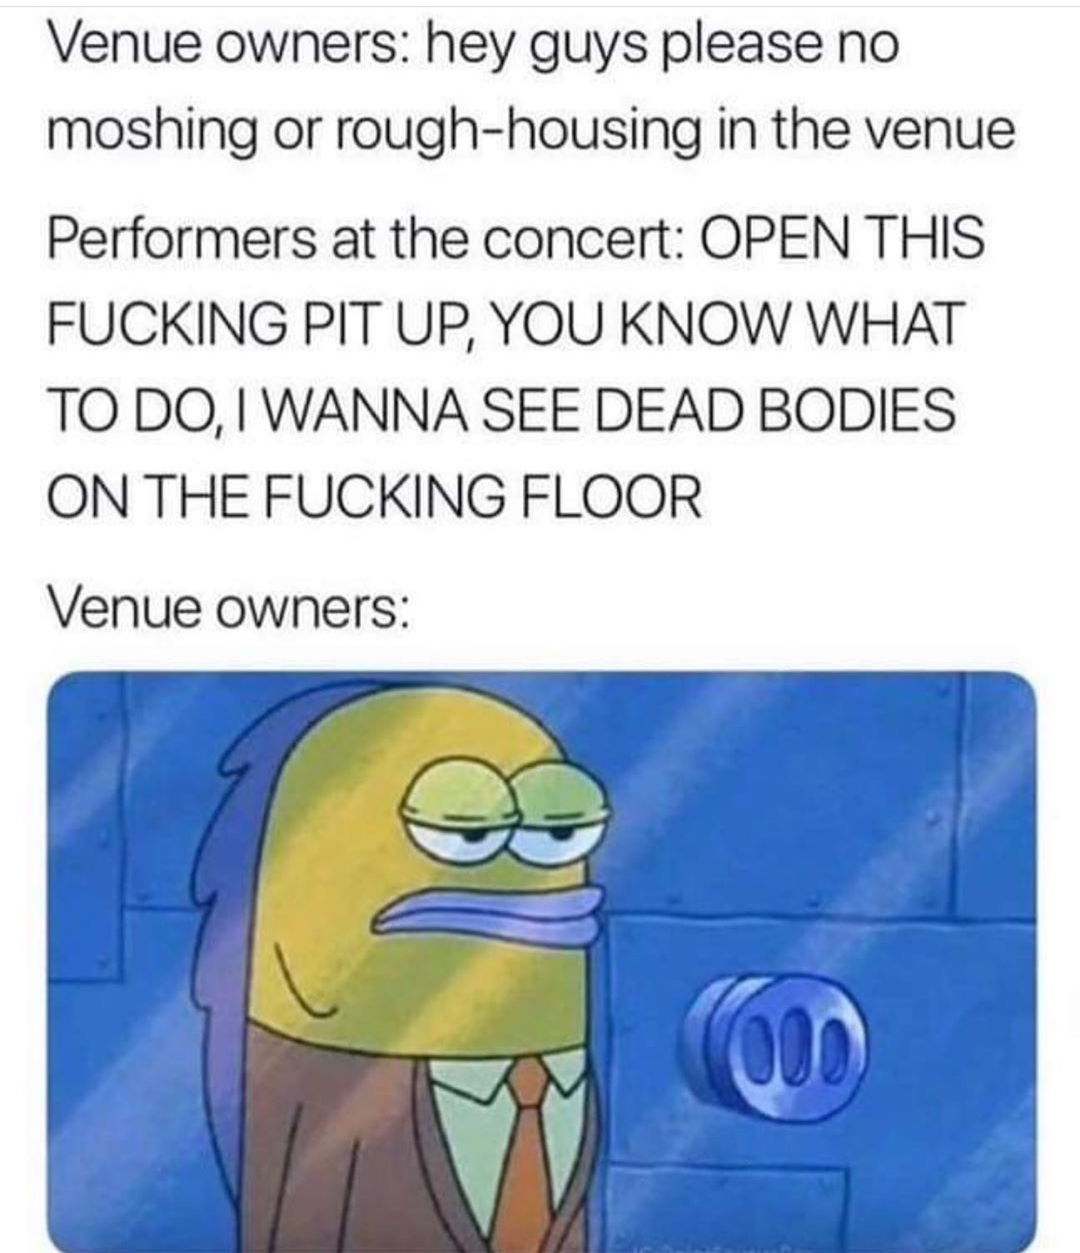 venue owners meme - Venue owners hey guys please no moshing or roughhousing in the venue Performers at the concert Open This Fucking Pit Up, You Know What To Do, I Wanna See Dead Bodies On The Fucking Floor Venue owners